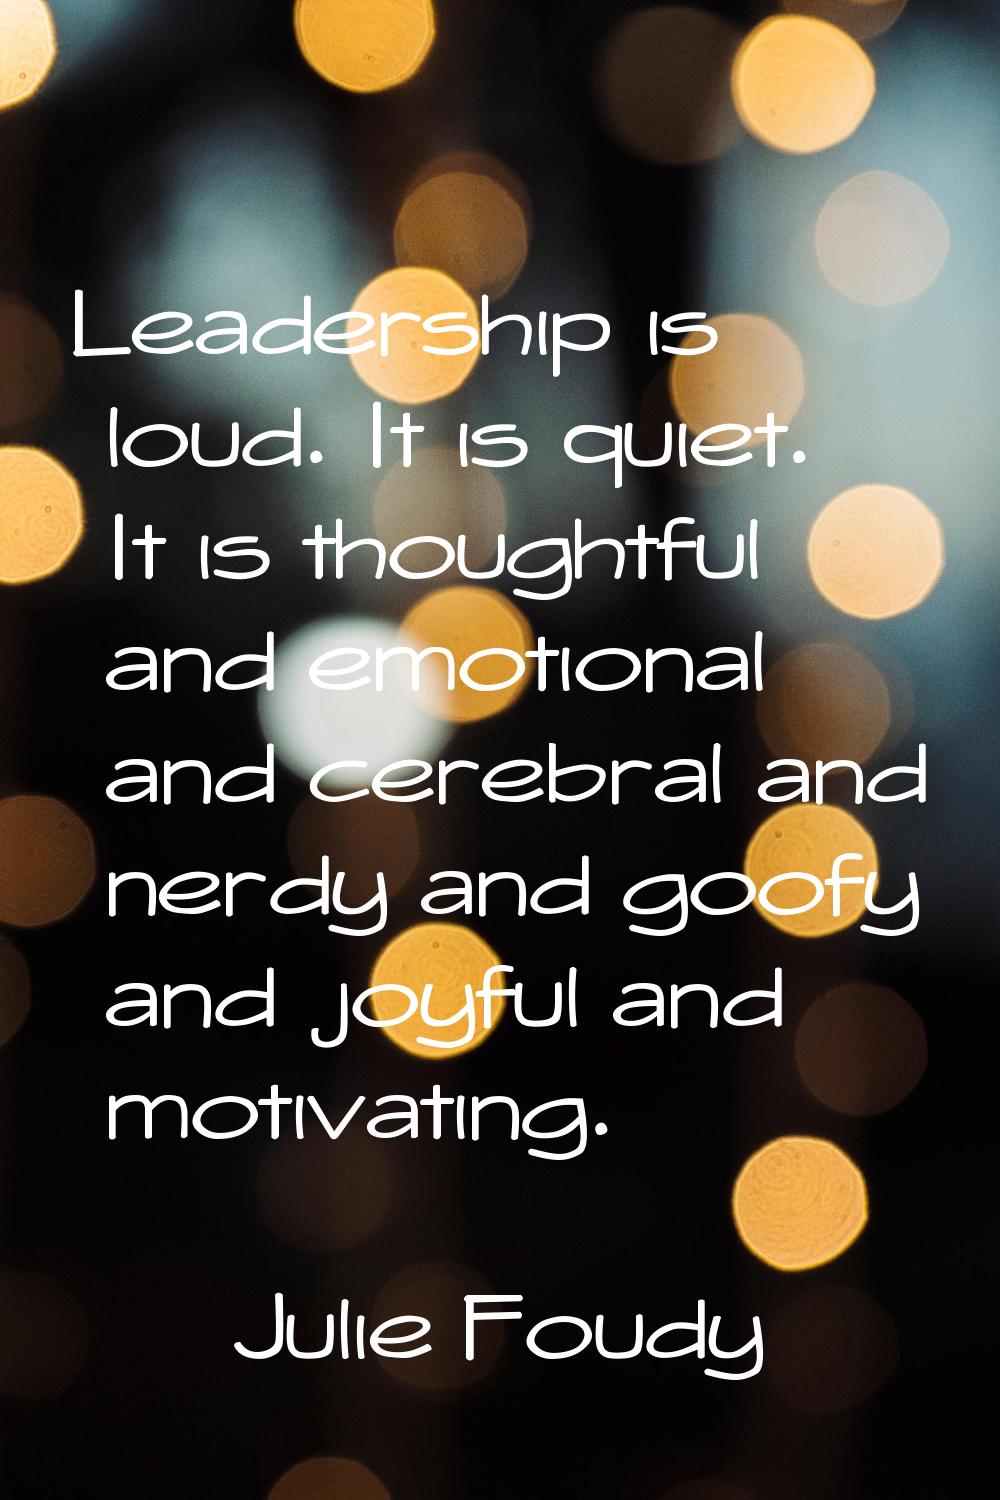 Leadership is loud. It is quiet. It is thoughtful and emotional and cerebral and nerdy and goofy an